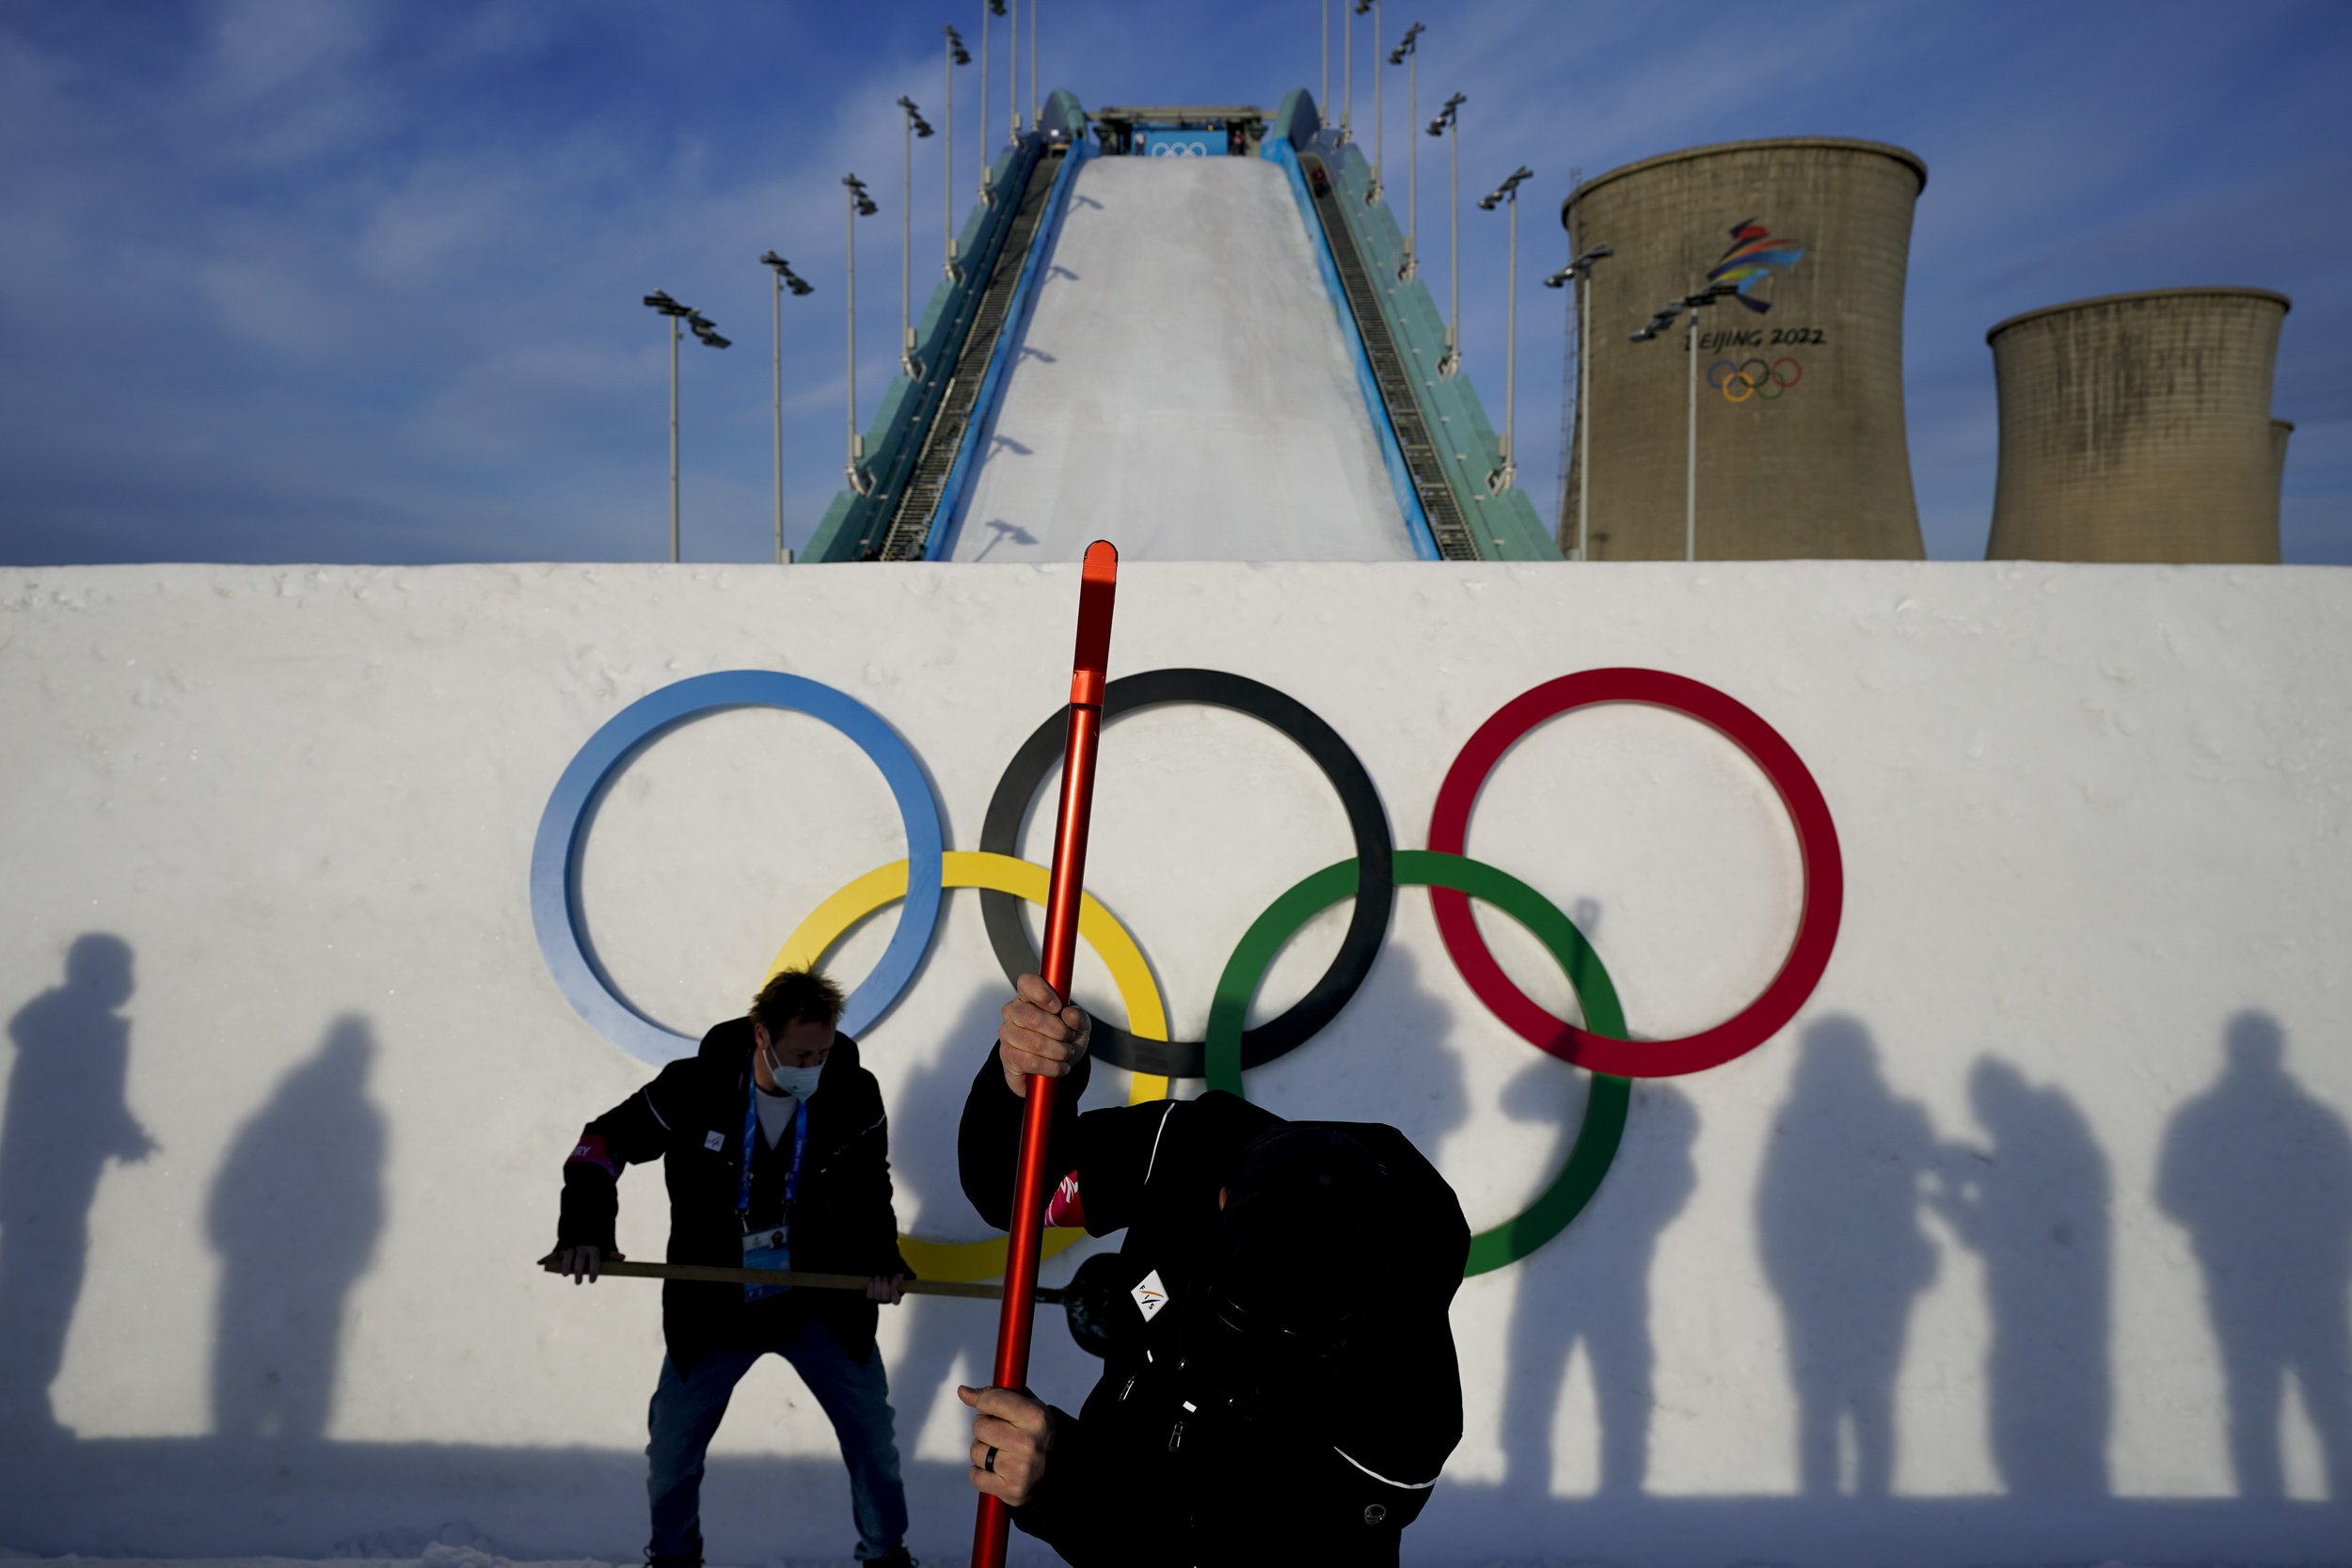  Two workers work around the kicker before a training session for the freestyle skiing big air competition at the 2022 Winter Olympics, Sunday, Feb. 6, 2022, in Beijing. (AP Photo/Jae C. Hong) 